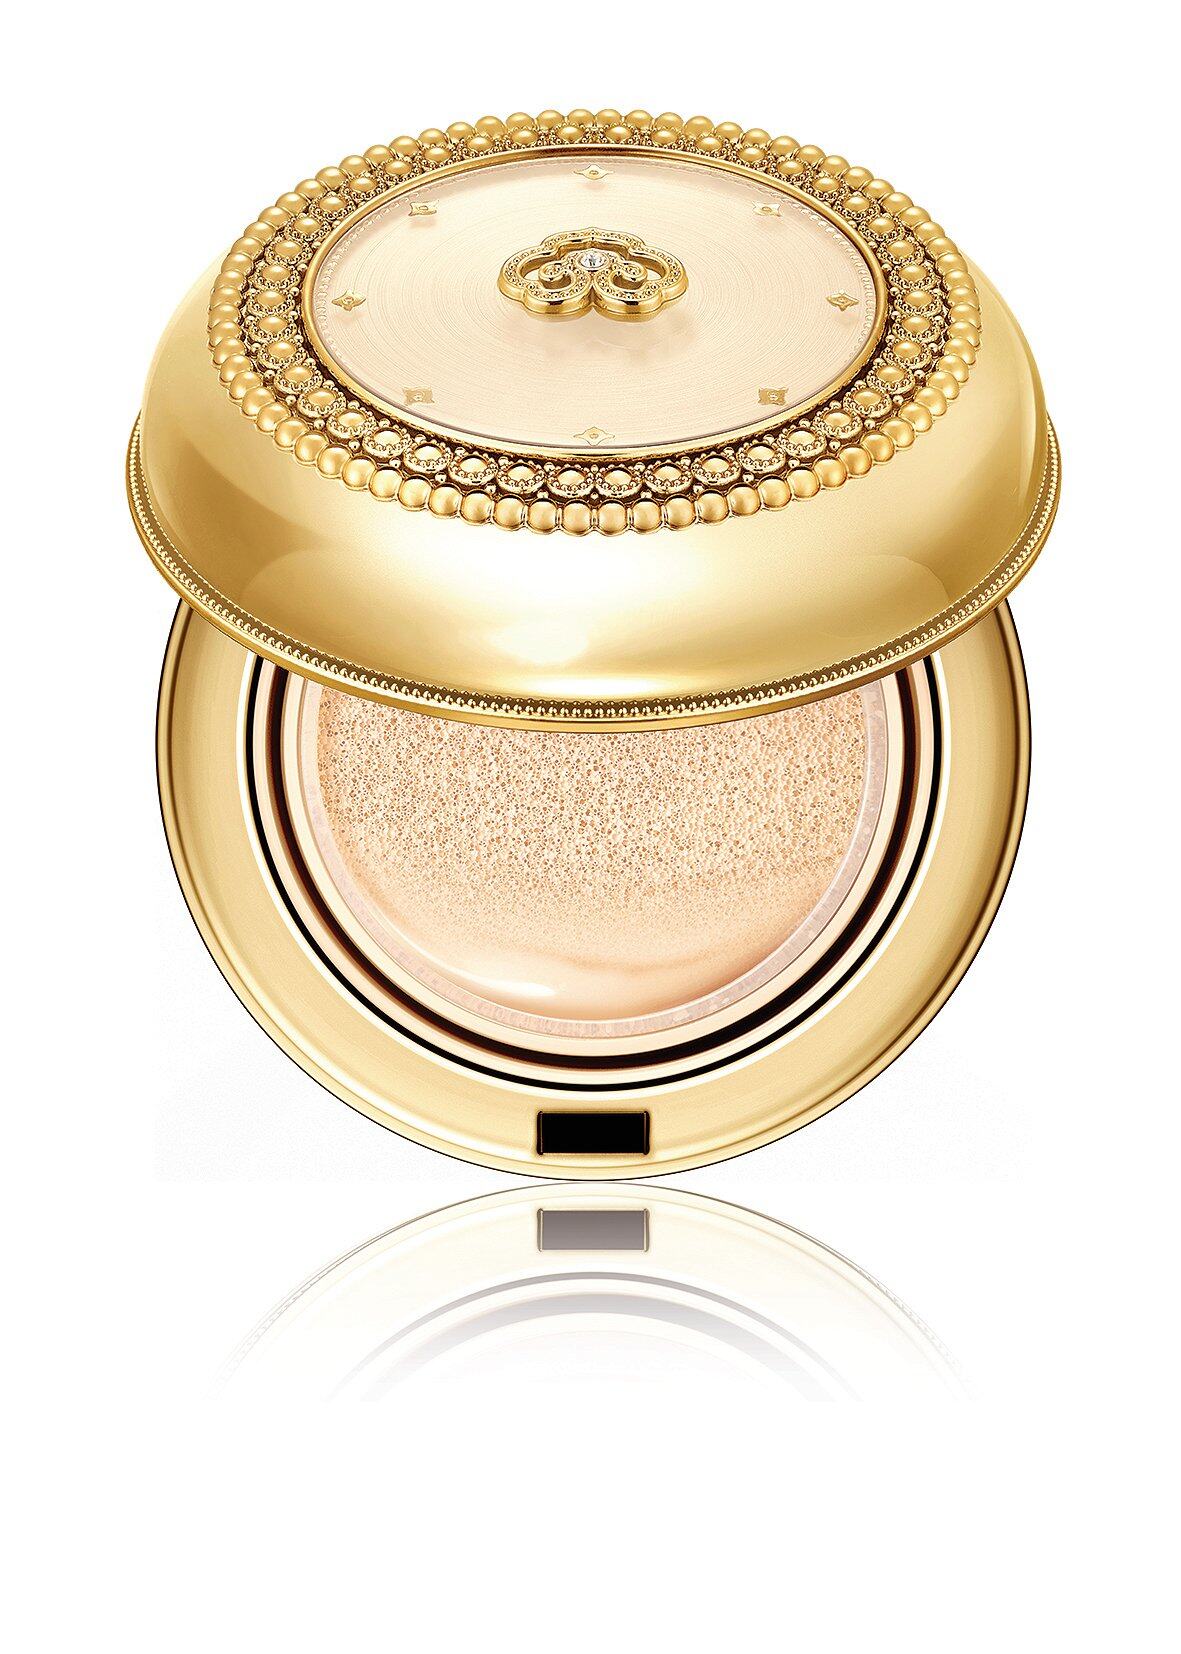 The History of Whoo Luxury Golden Cushion Glow